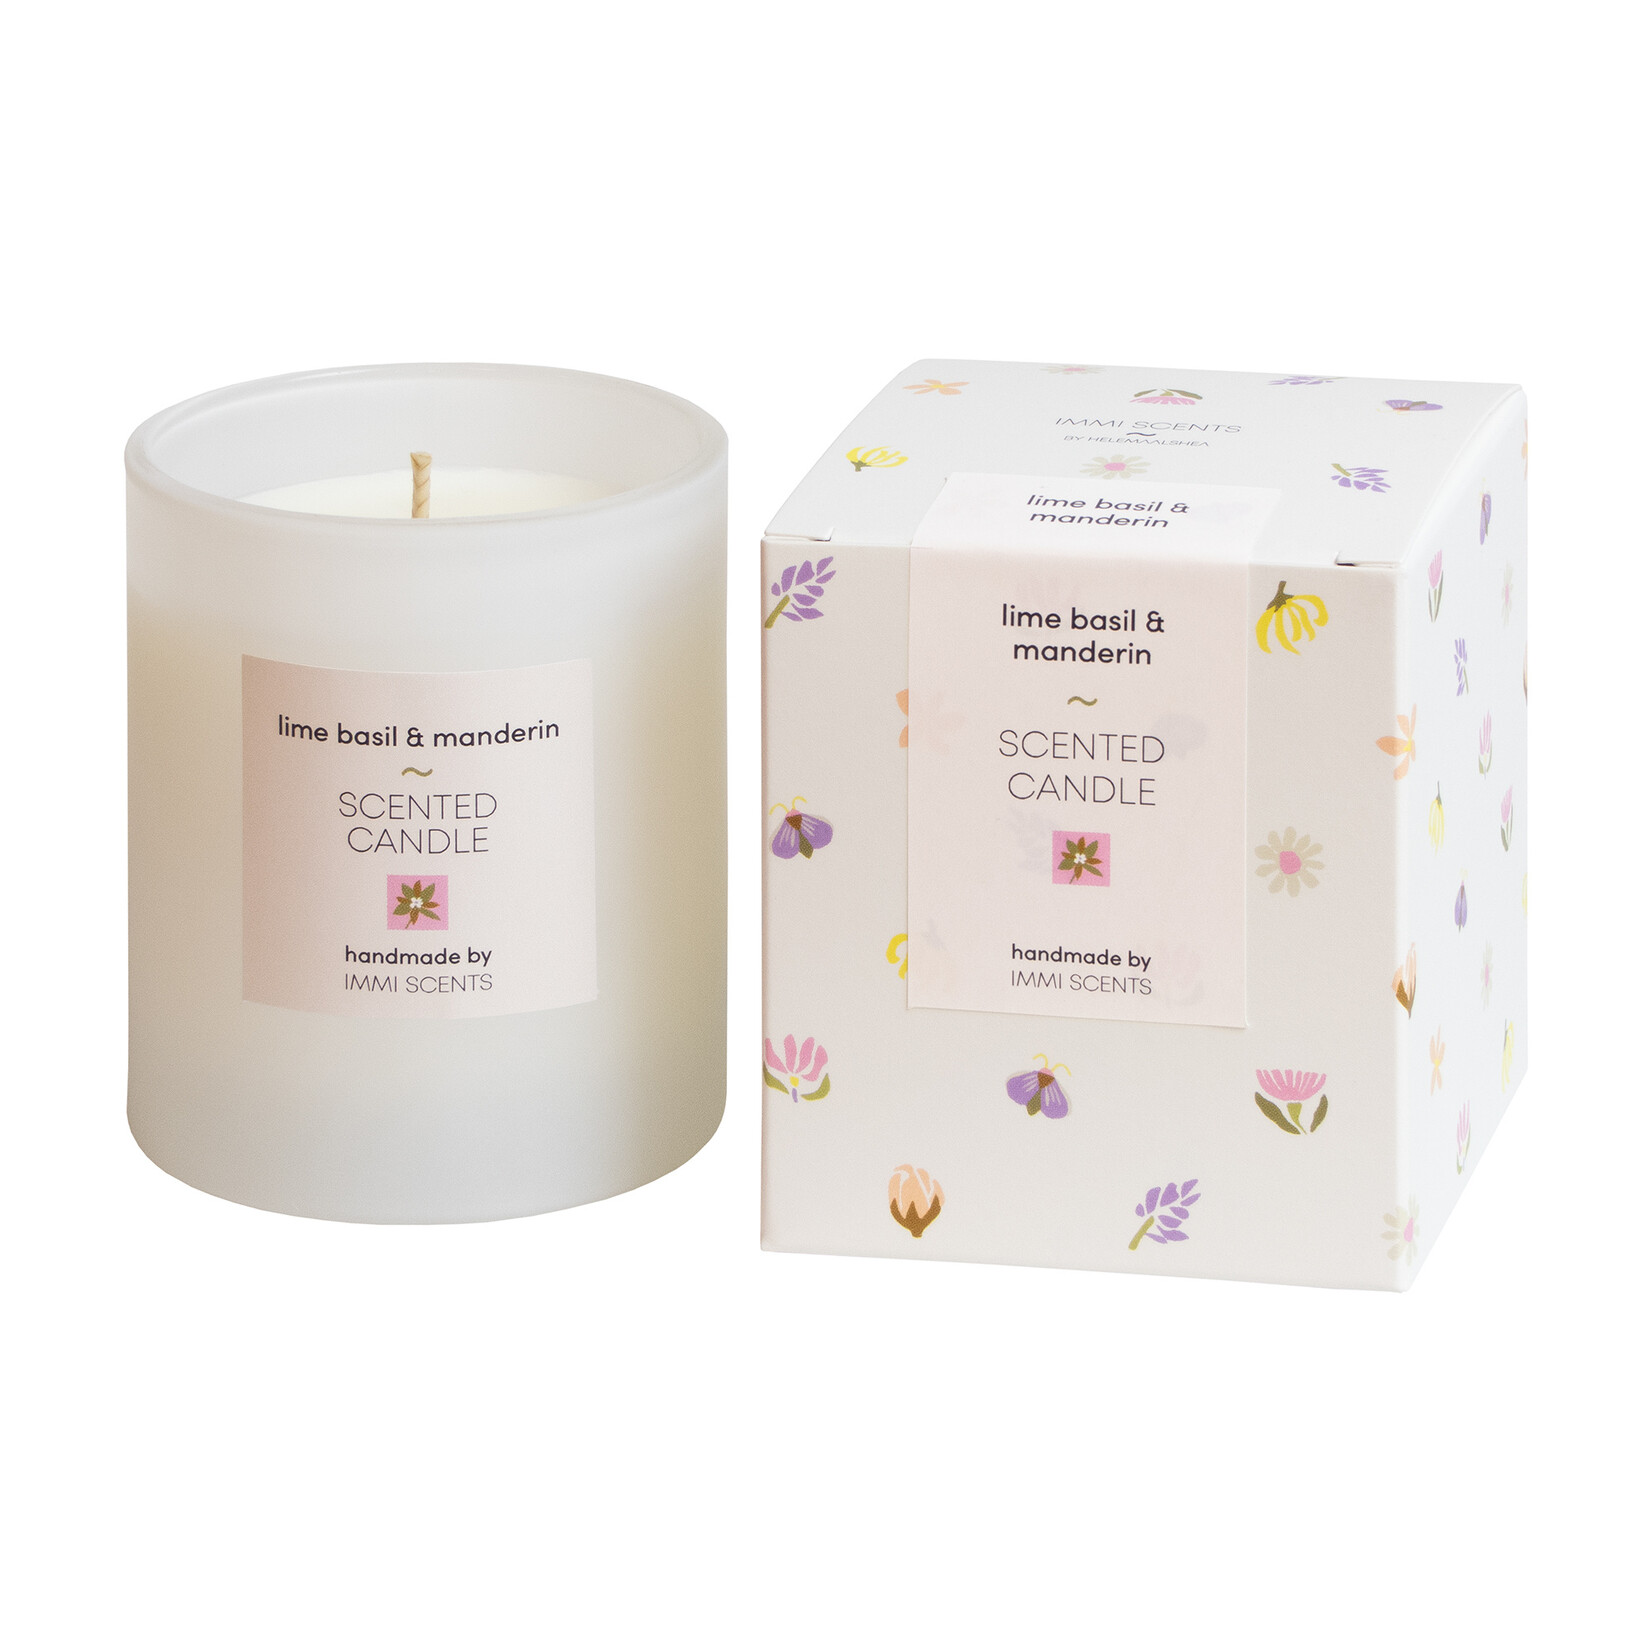 Scented candle - Lime, Basil & Mandarin - white